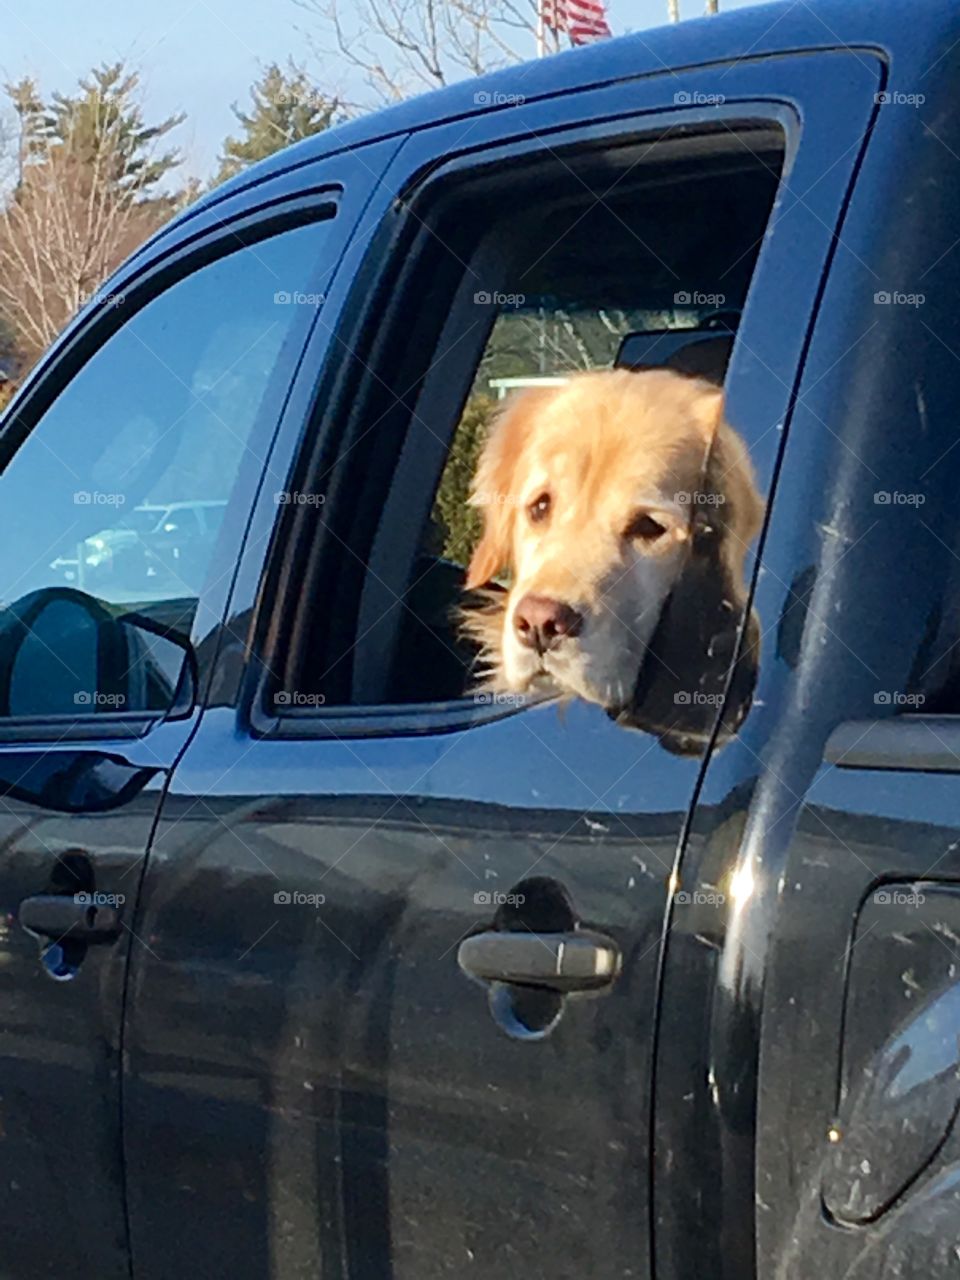 Dog Patiently Waiting In Back Seat of Truck

This dog was patiently waiting for his master to come out of the grocery store or maybe even the dog treats that might be coming out for him too!🐶